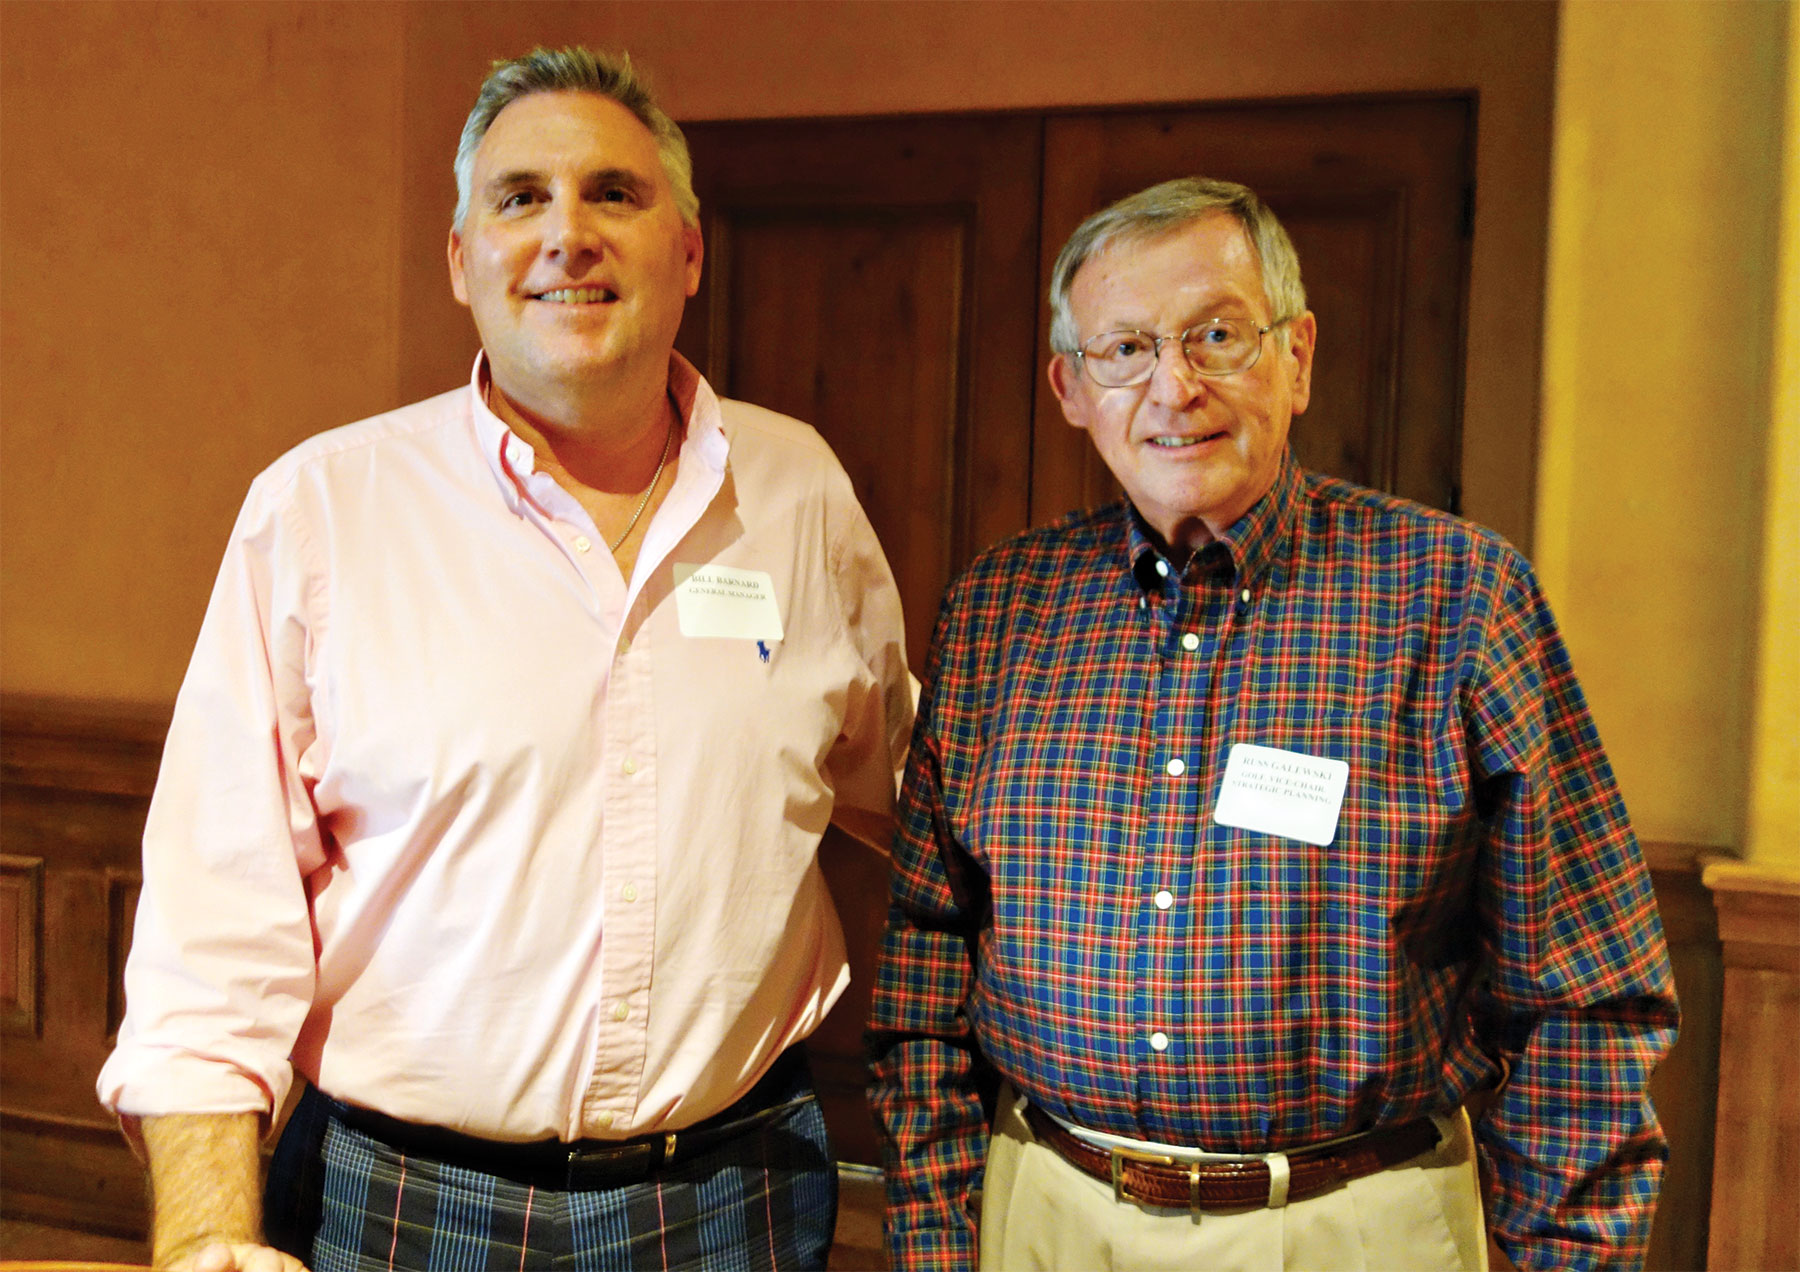 General Manager Bill Barnard presented Russ Galewski with Volunteer of the Year honors.